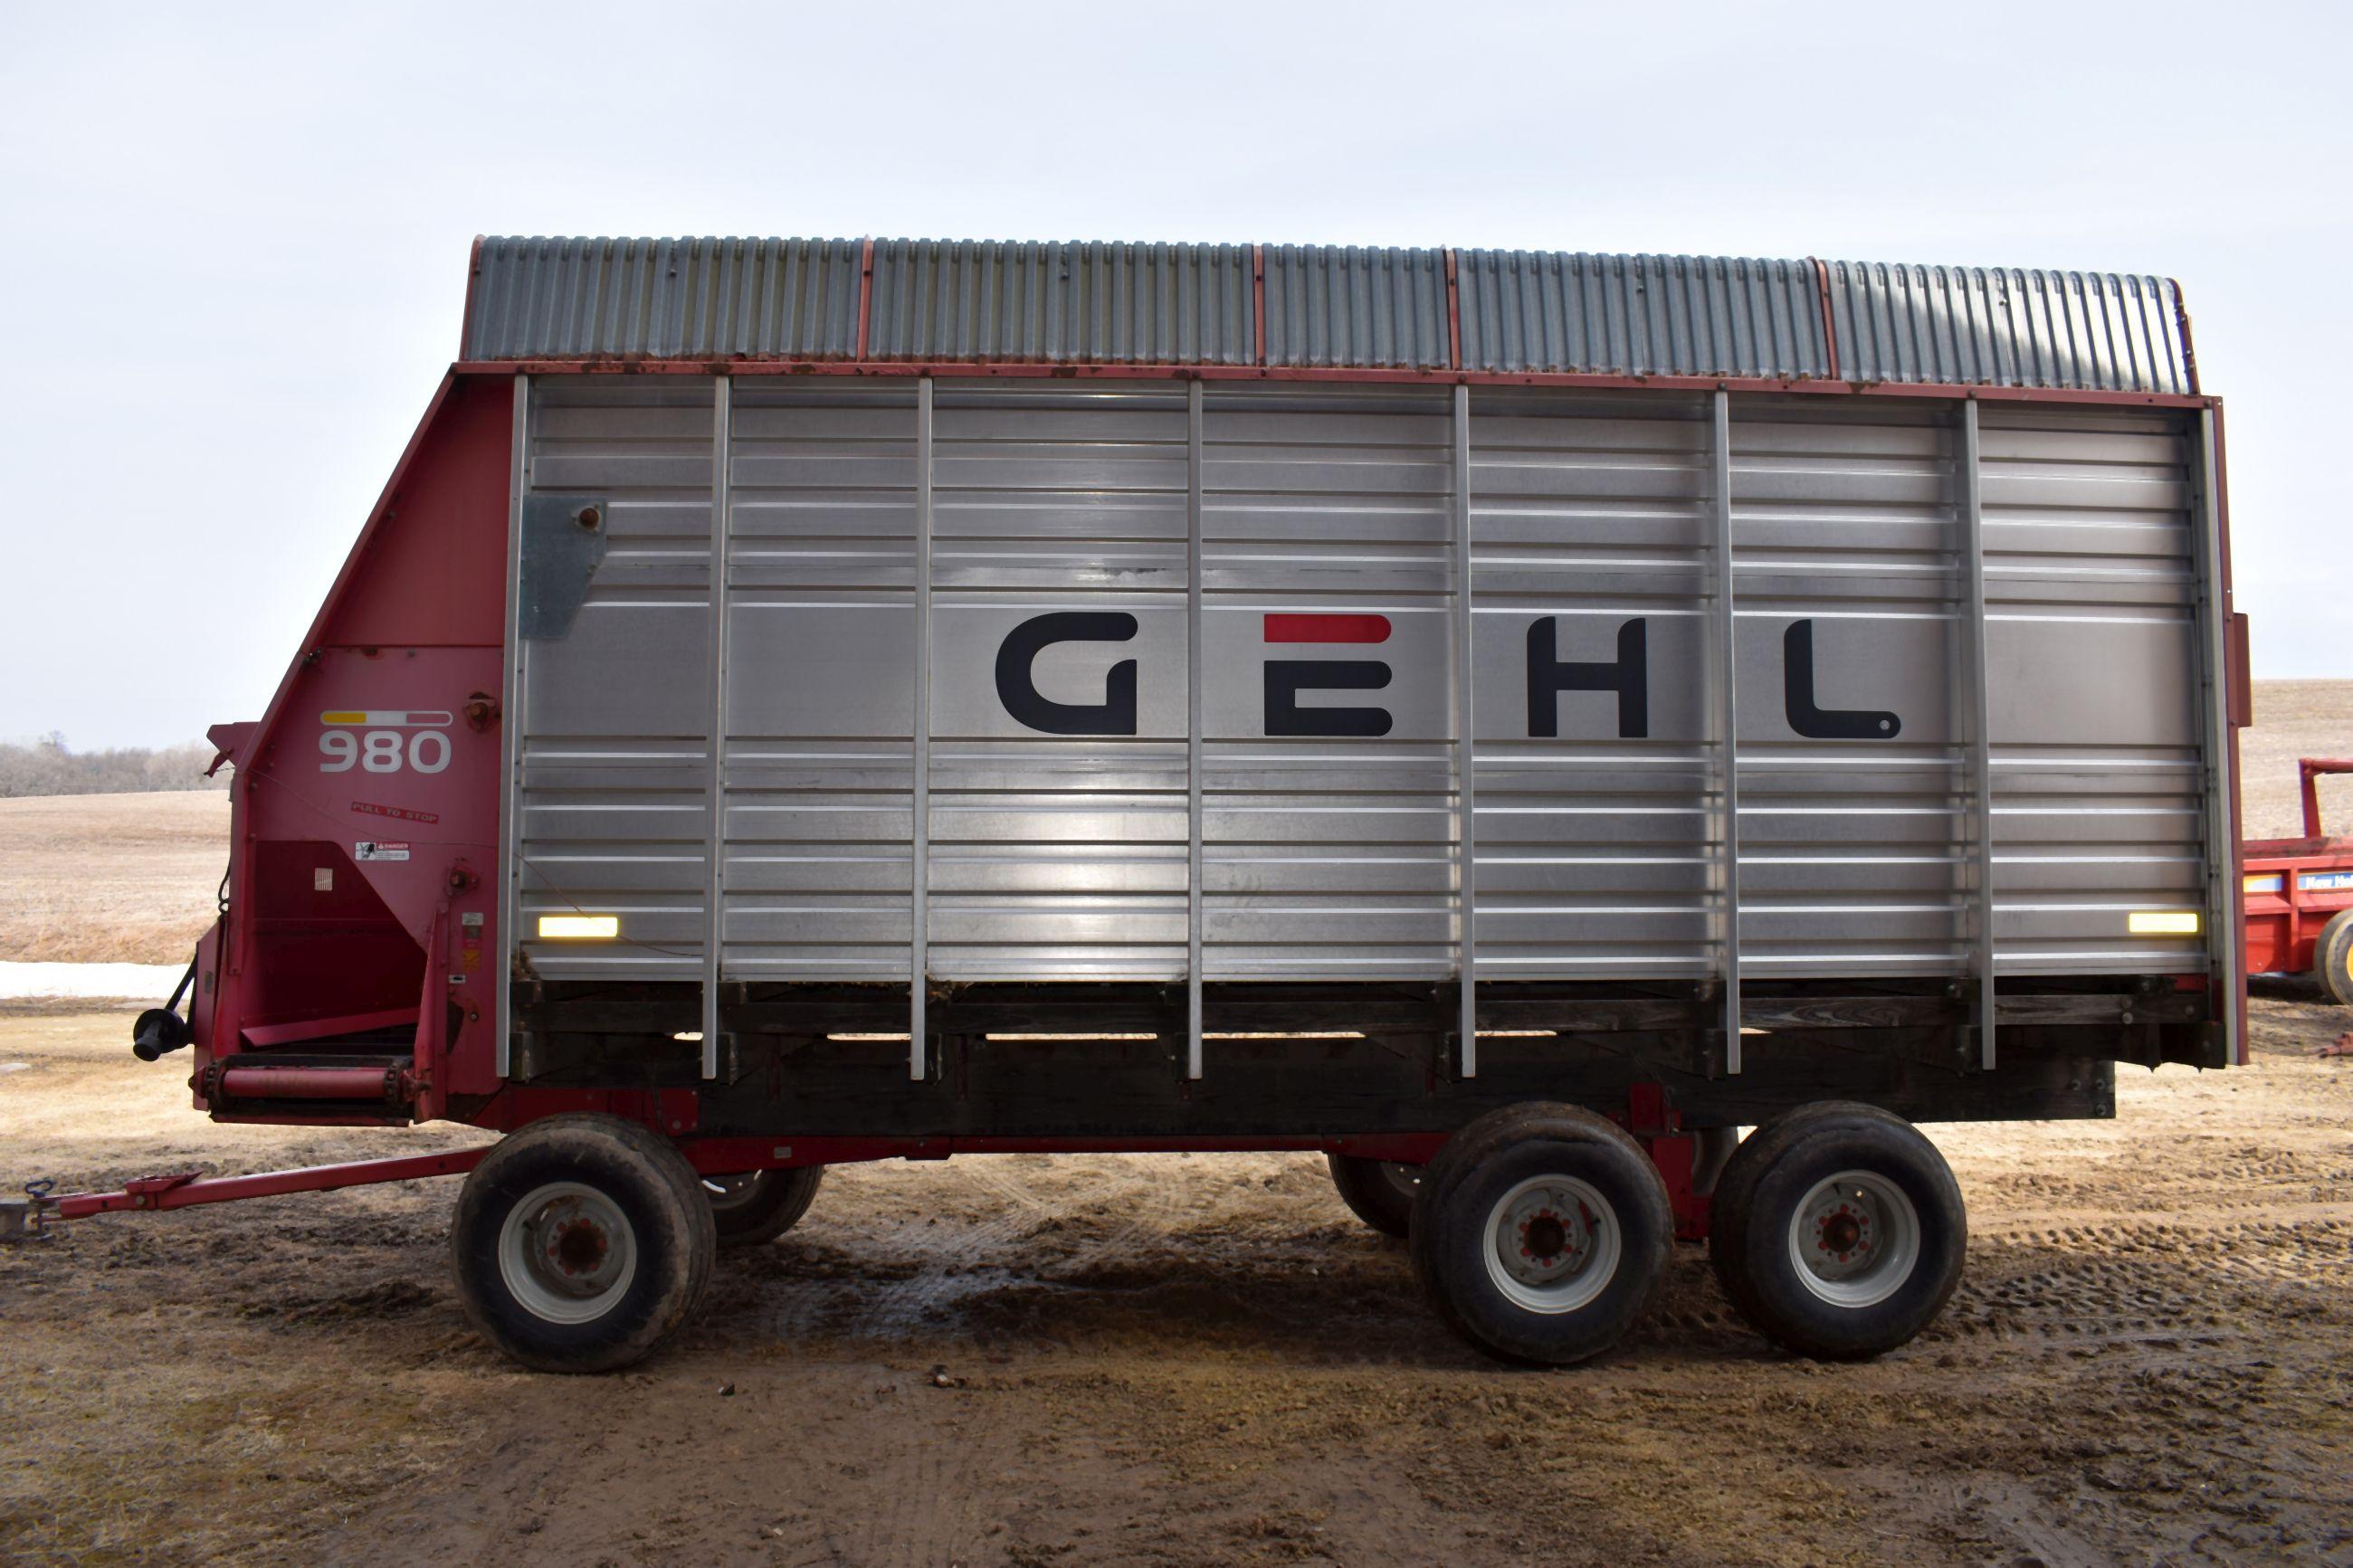 Gehl 980 18’ Forage Box, 3 Beater, Roof, 540PTO, 12.5x15 Tires, 12 Ton Tandem Running Gear, SN: 5264